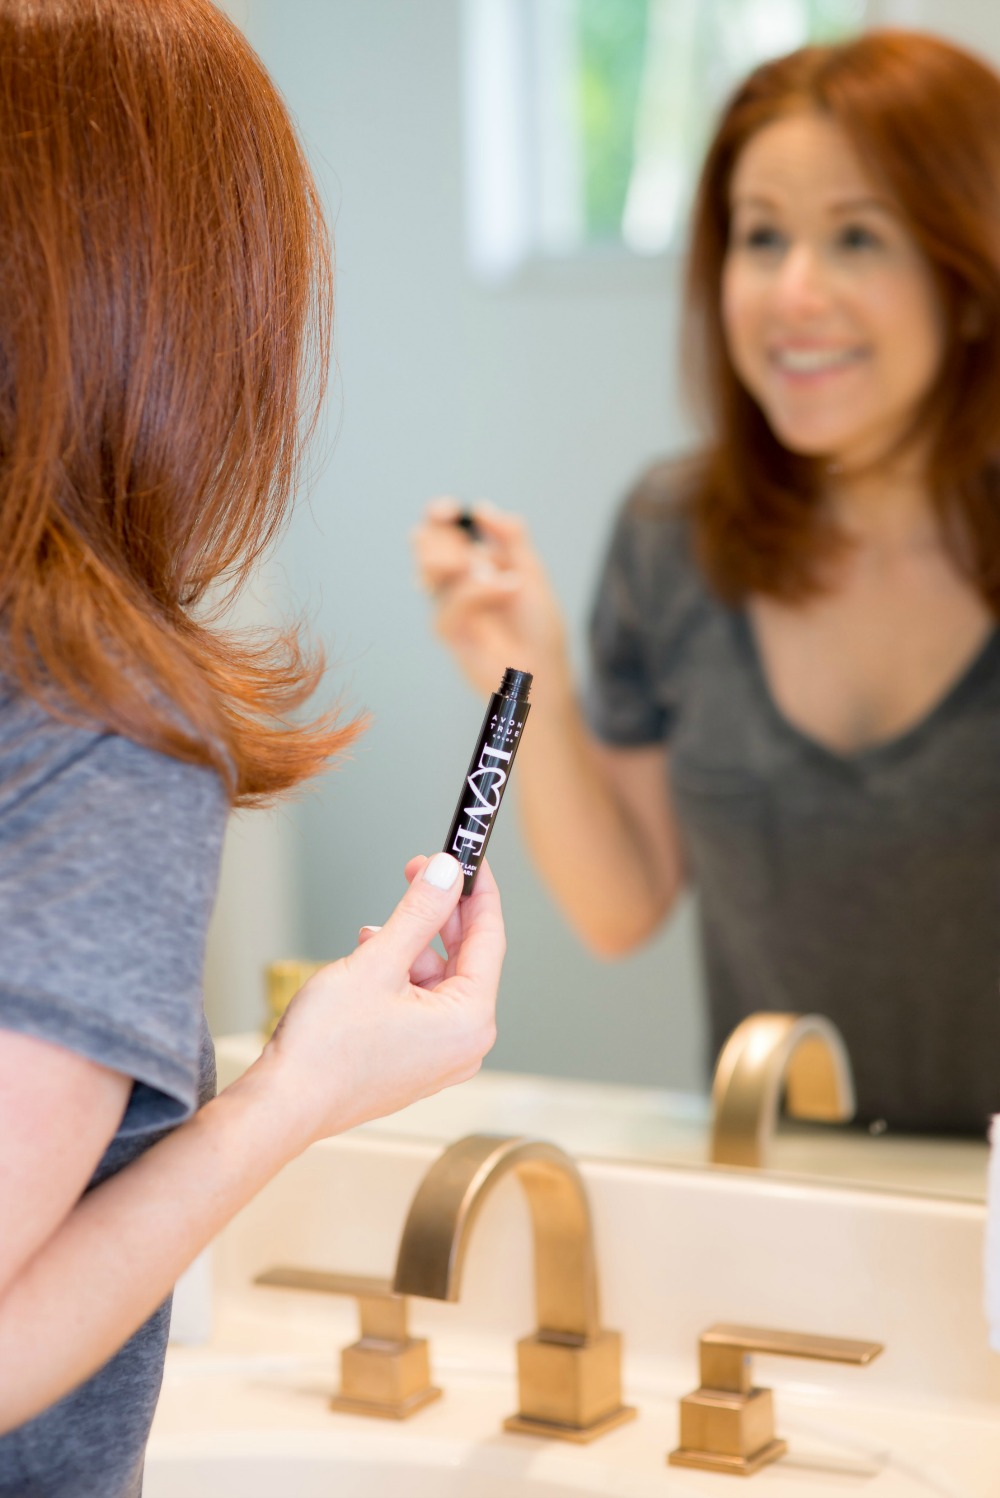 Testing out the new AVON power couple to naturally grow, lengthen and nourish lashes | Avon | My Nighttime Routine featured by popular Florida life and style blogger The Modern Savvy